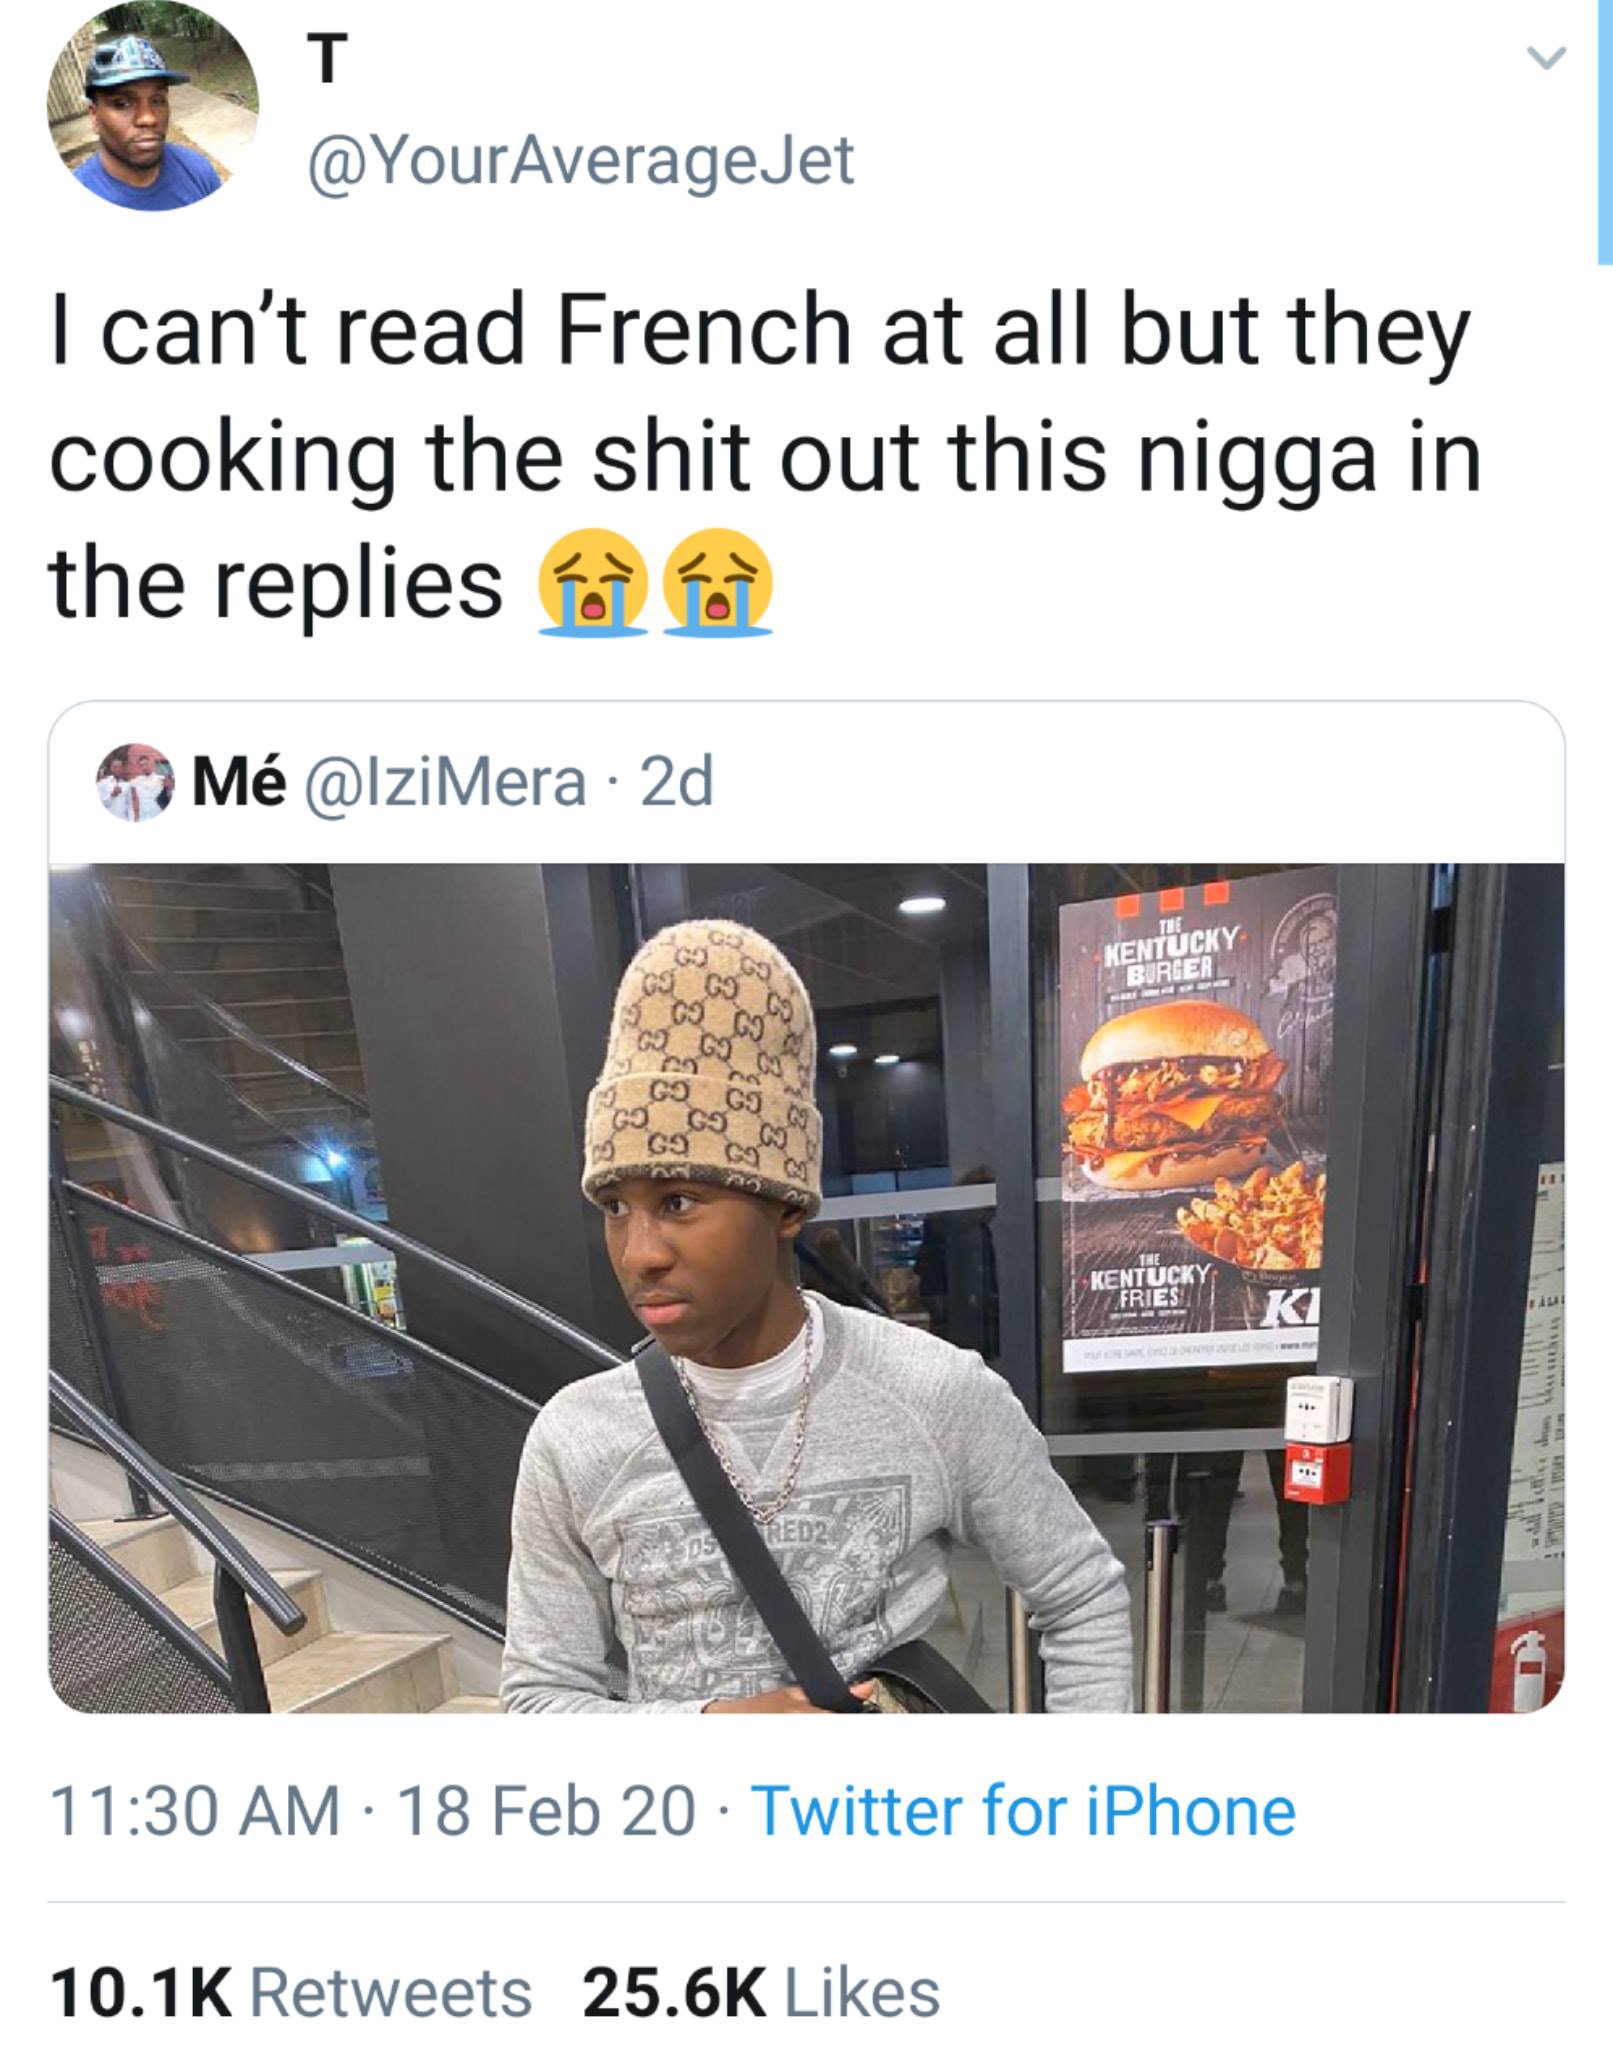 media - T I can't read French at all but they cooking the shit out this nigga in the replies fa @ M 2d T Kentucky Burger ca G9 co G5 G5 Cs Cs Go 630 G9 69 Go 69 The Kentucky Fries . 18 Feb 20 Twitter for iPhone